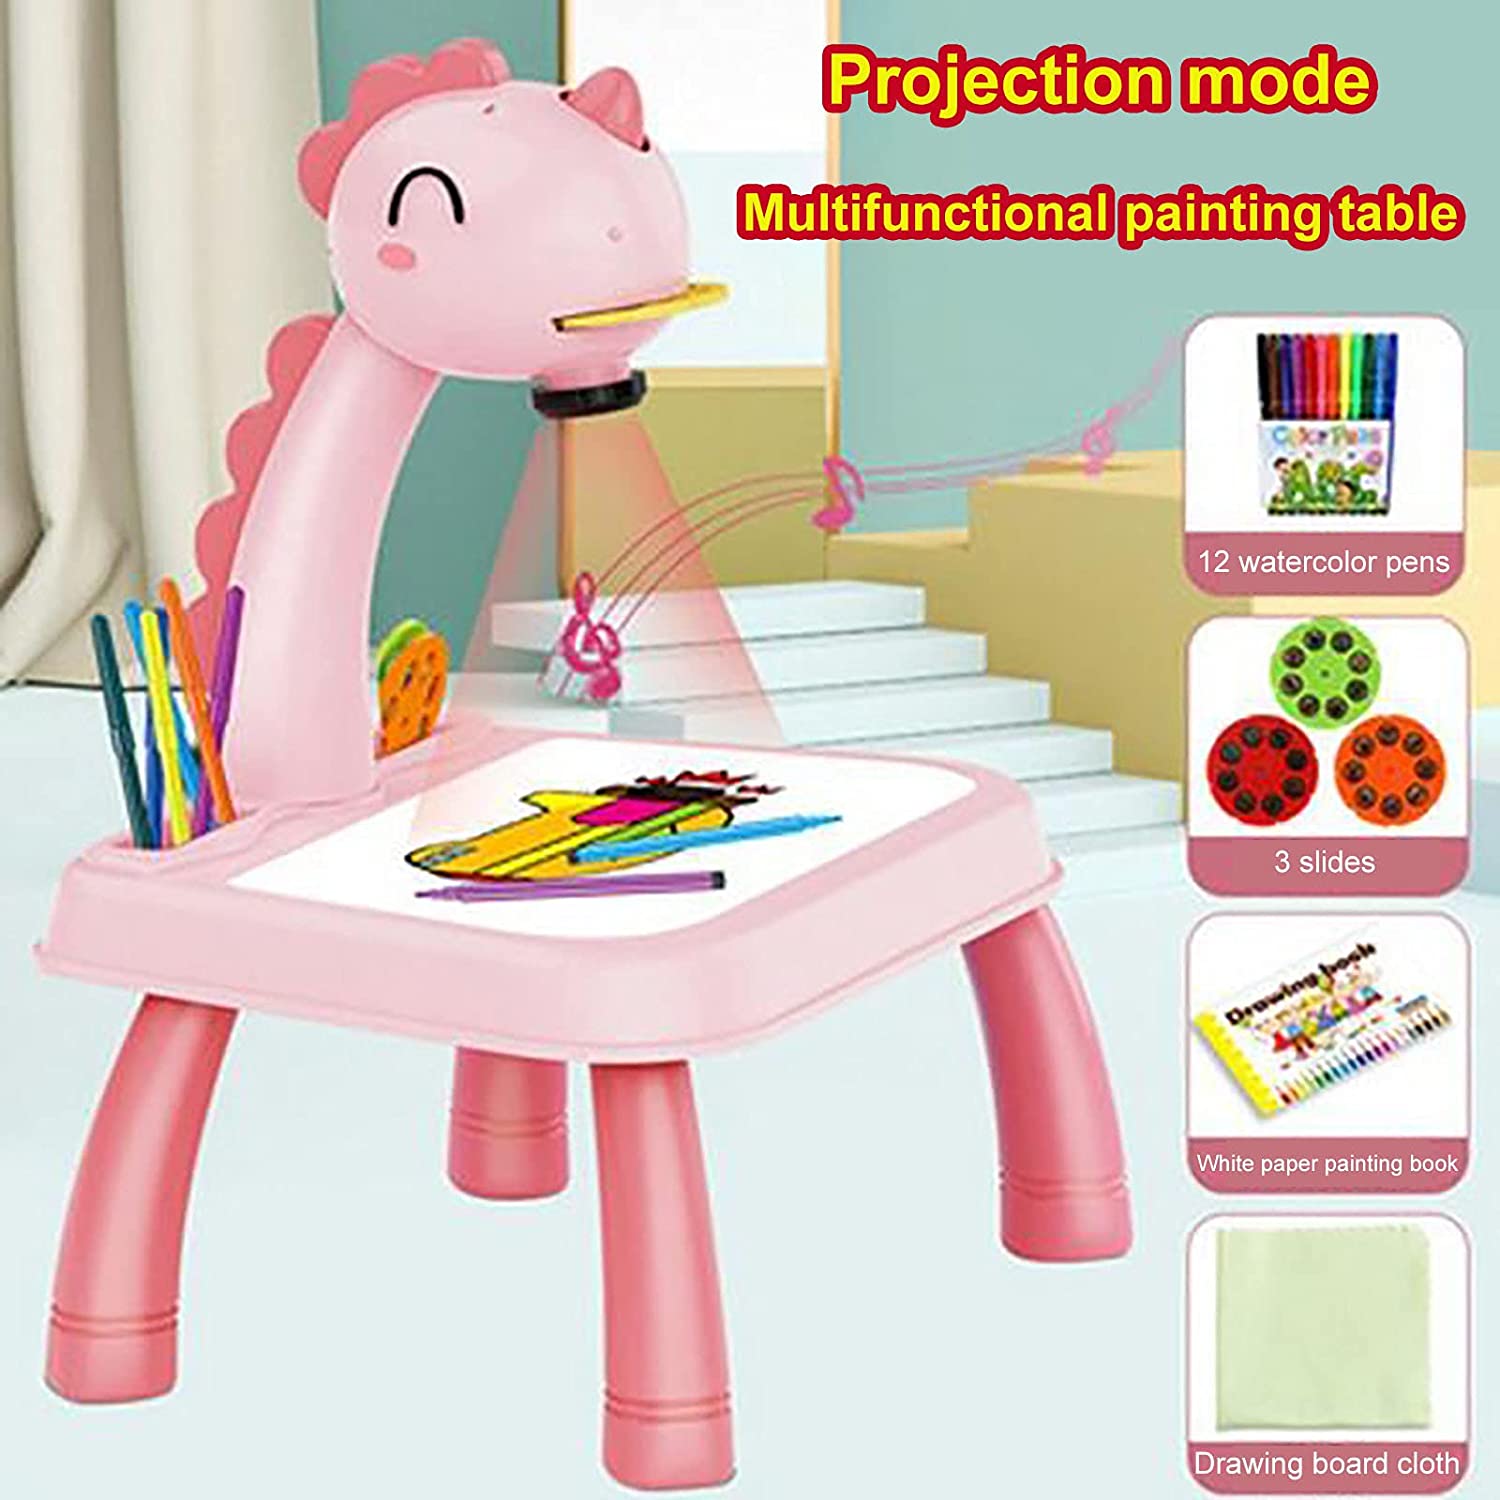  Owill-home Drawing Projector Table for Kids, Trace and Draw  Projector Toy, Child Learning Desk with Smart Projector, Learning  Projection Painting Machine Drawing Playset for Boys Girls (#001) : Toys &  Games